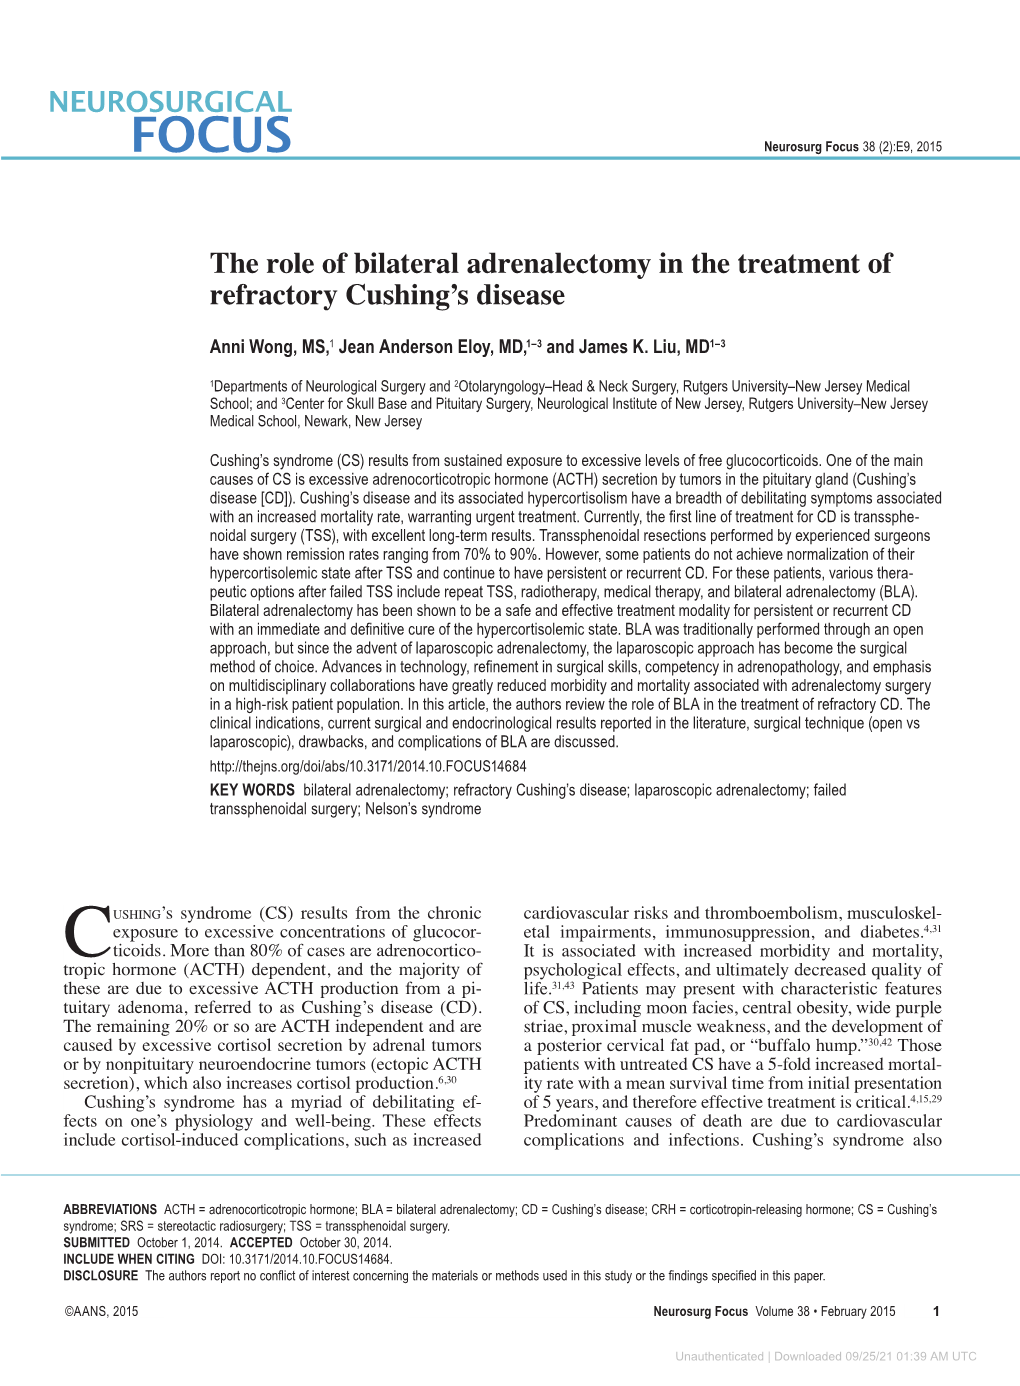 The Role of Bilateral Adrenalectomy in the Treatment of Refractory Cushing's